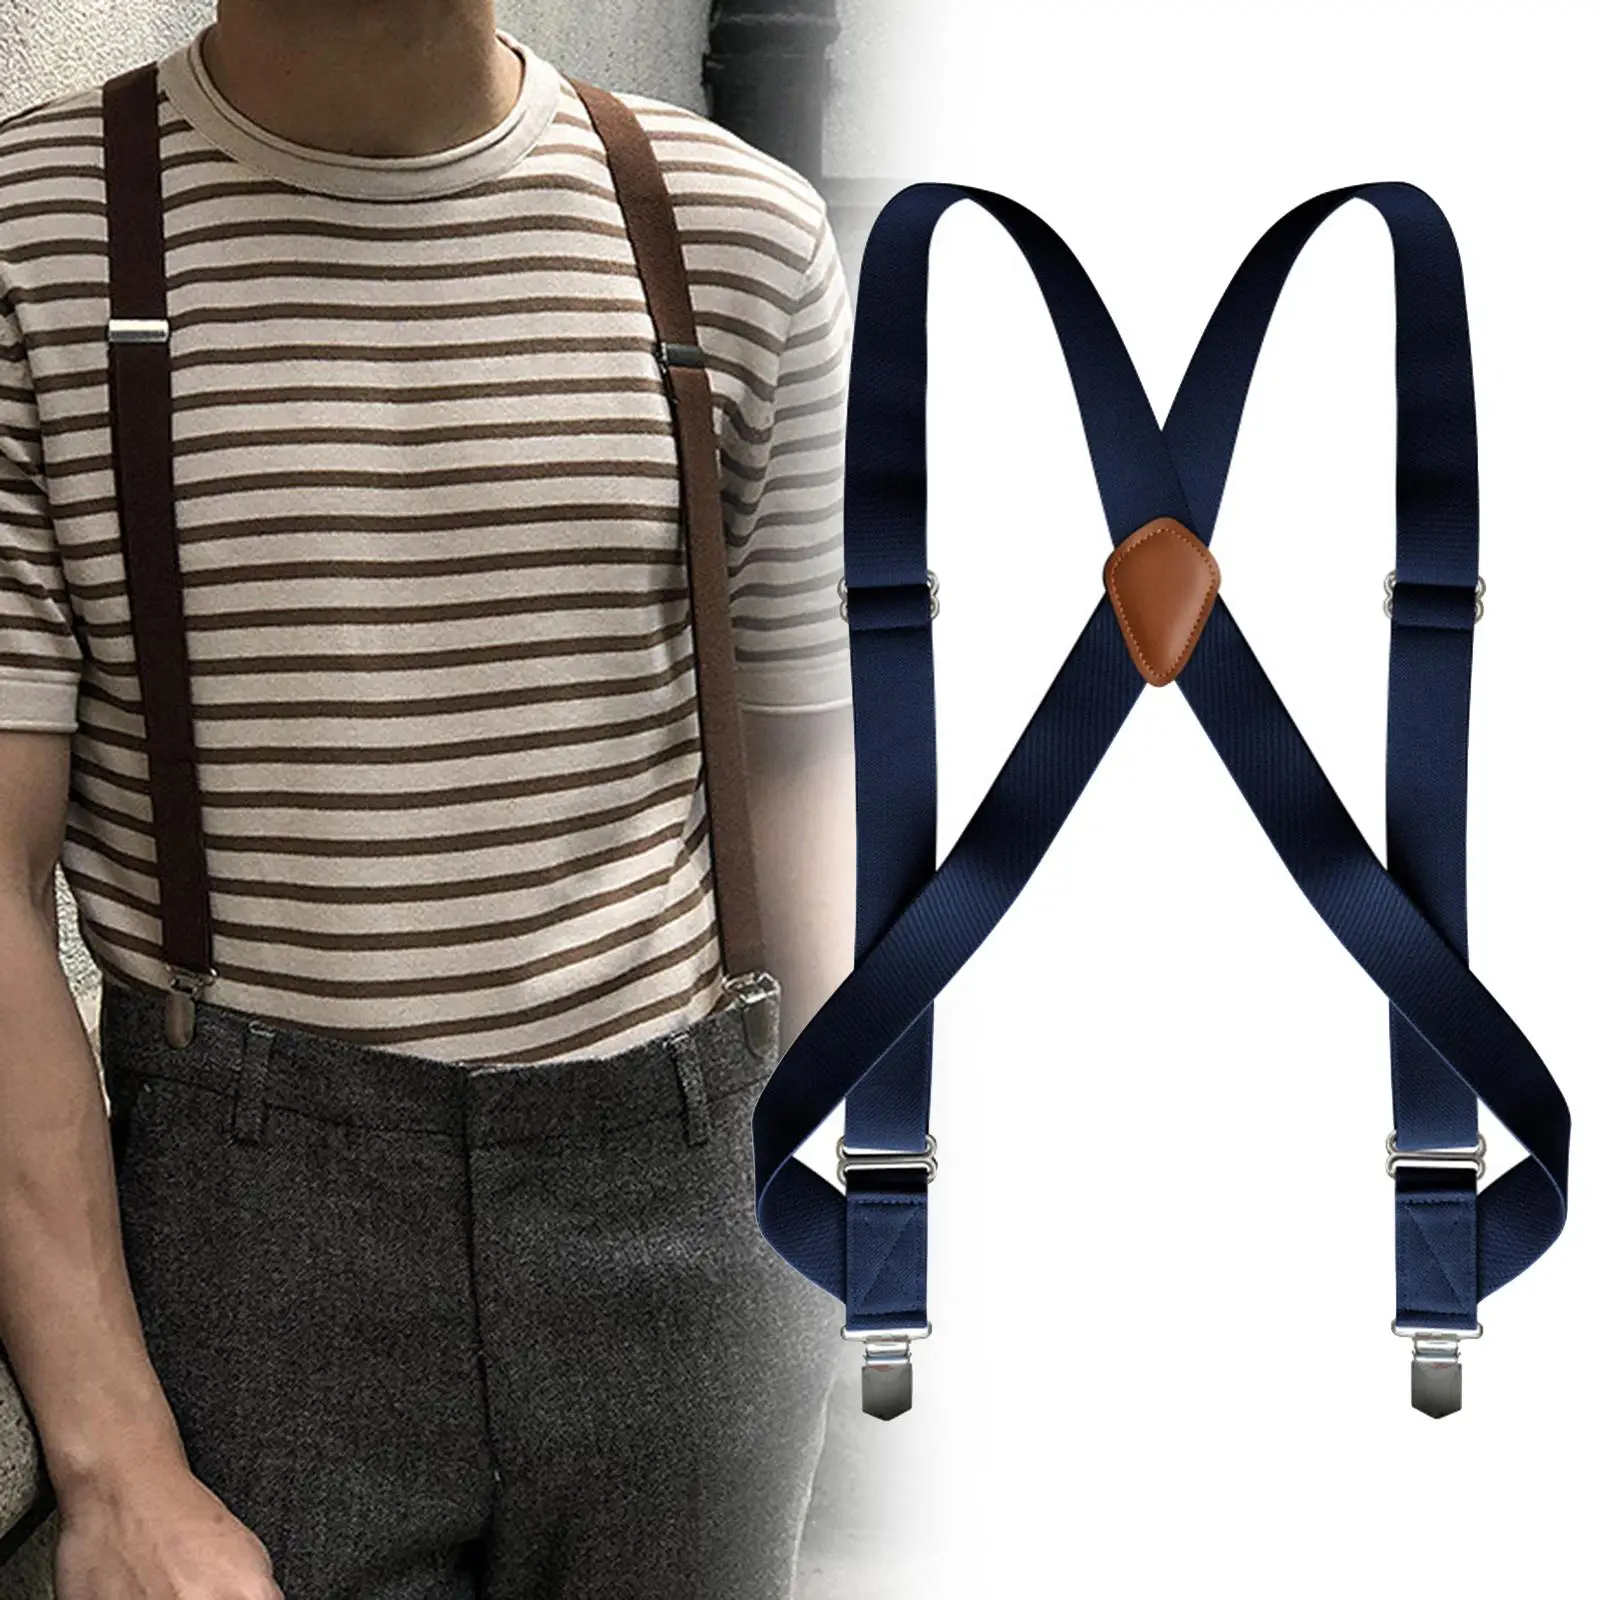 Mens Suspender with Clips Casual Washable Pants Holder Reusable Elastic Straps for Orchestra Friends Choir Trousers Suit Pants